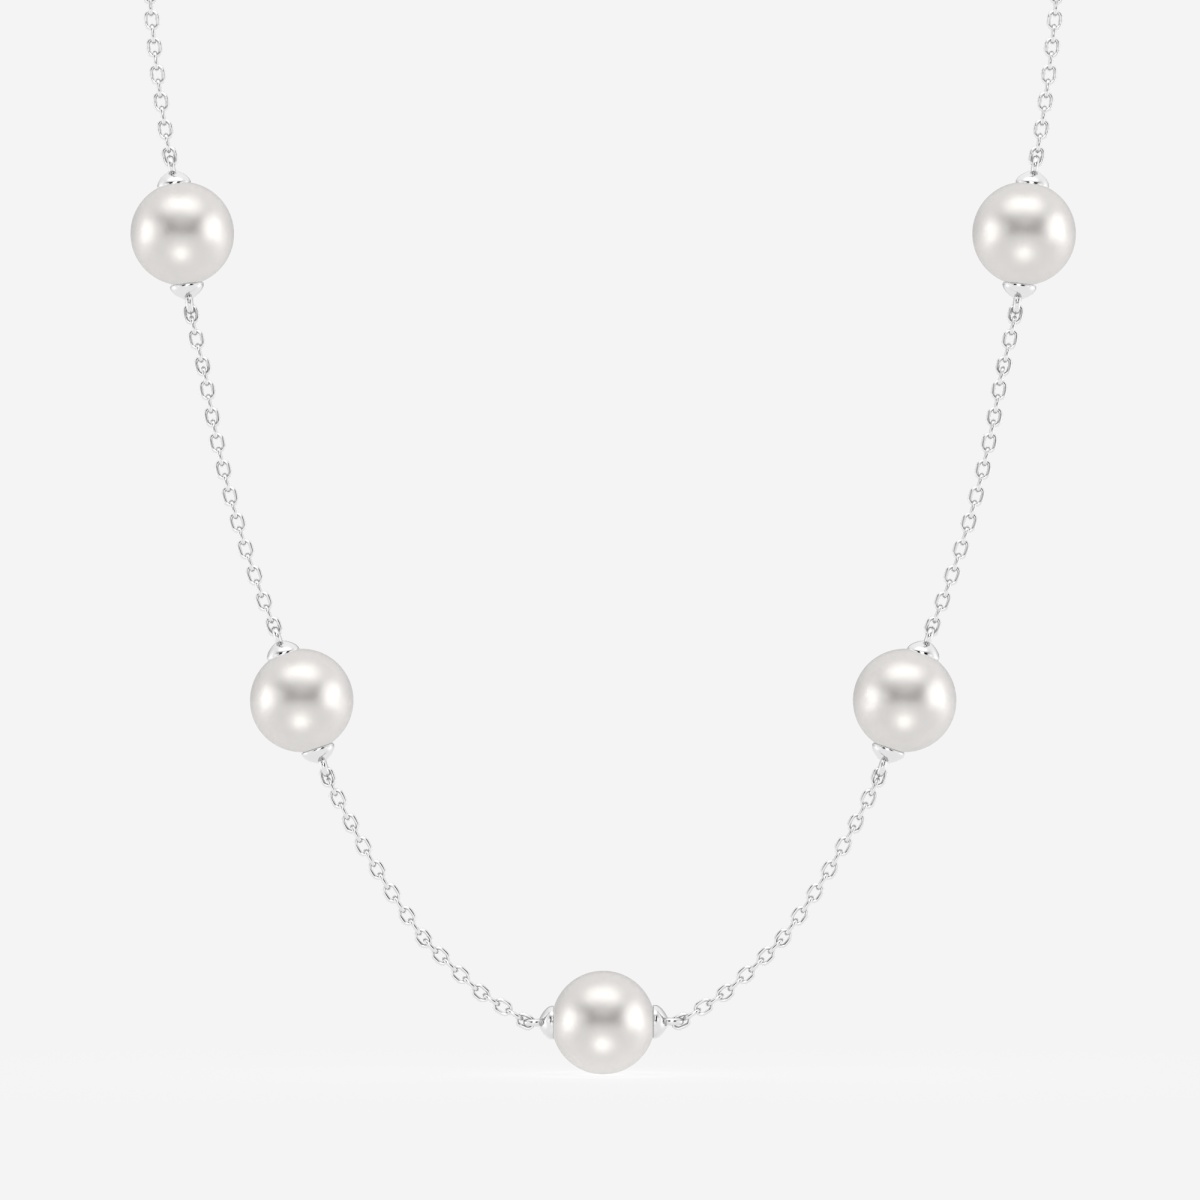 5.5 - 6.0 mm Cultured Freshwater Pearl Station Fashion Necklace